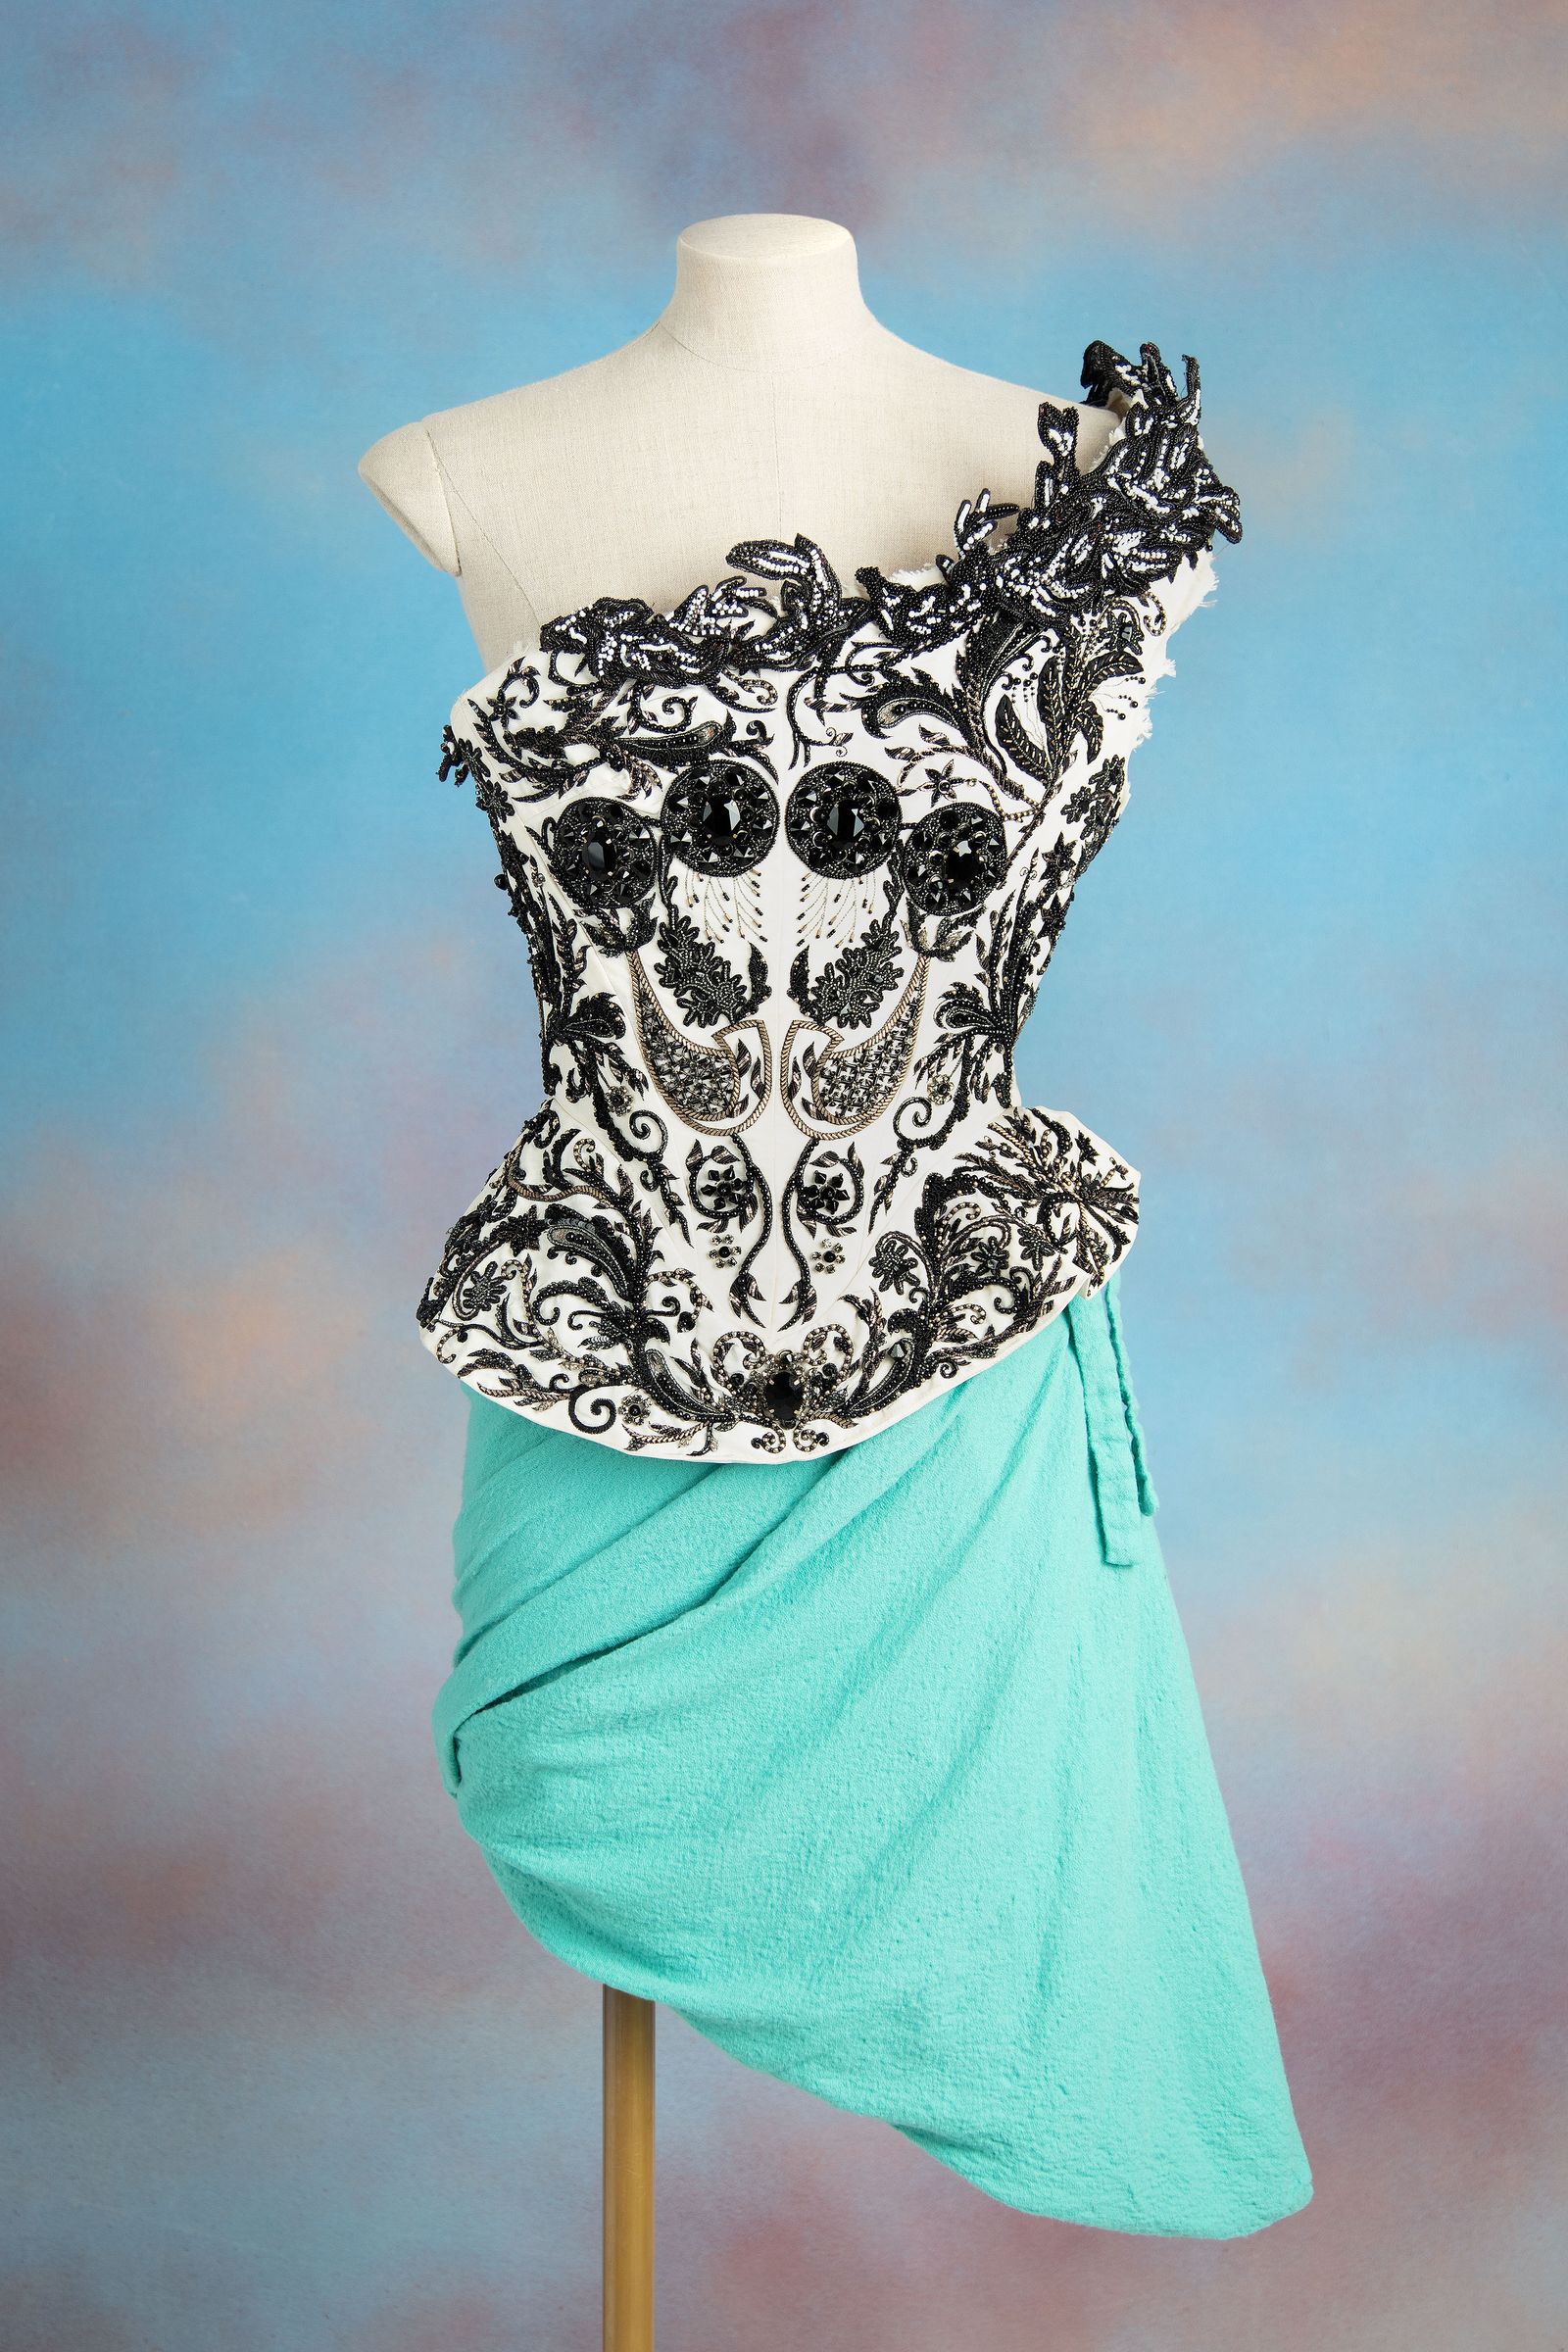 Iconic Vivienne Westwood corsets to go on display in London | Wallpaper